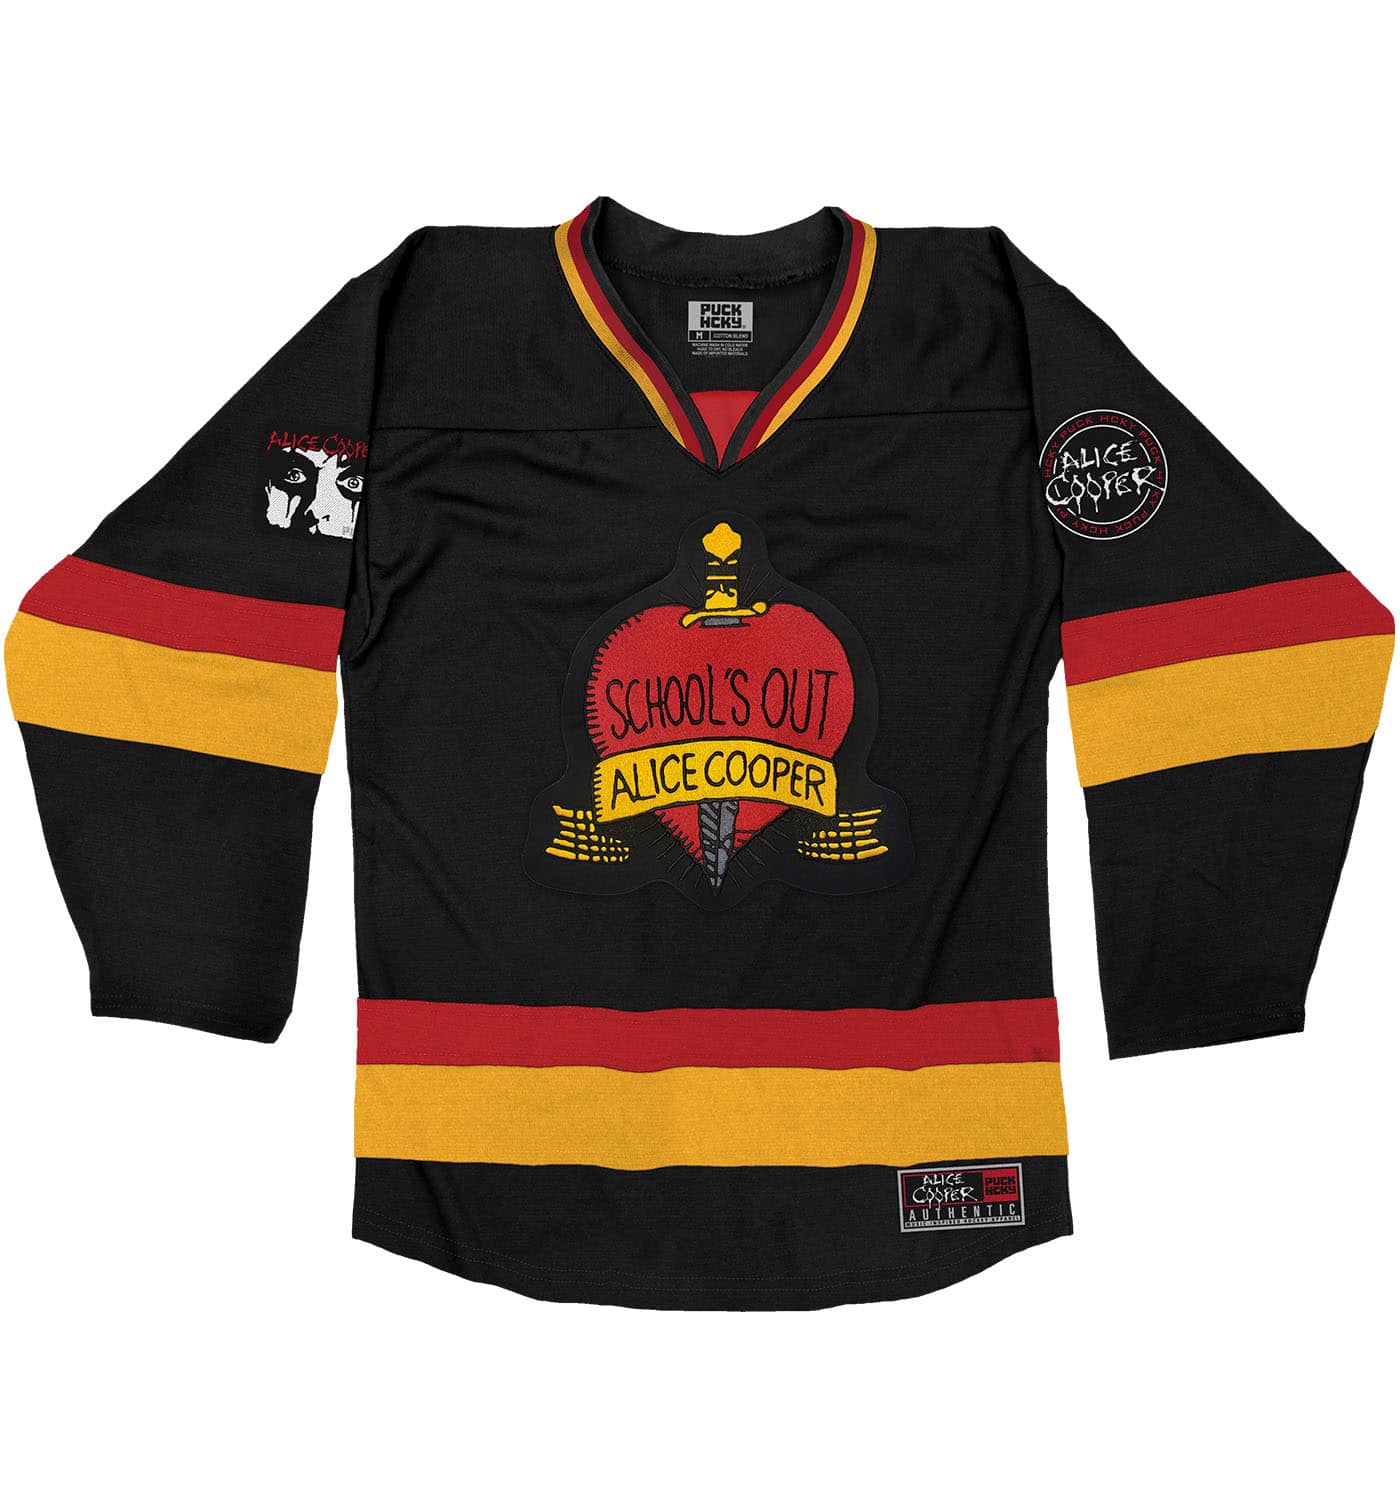 ALICE COOPER 'SCHOOLS OUT' DELUXE hockey jersey in black, gold, and red front view